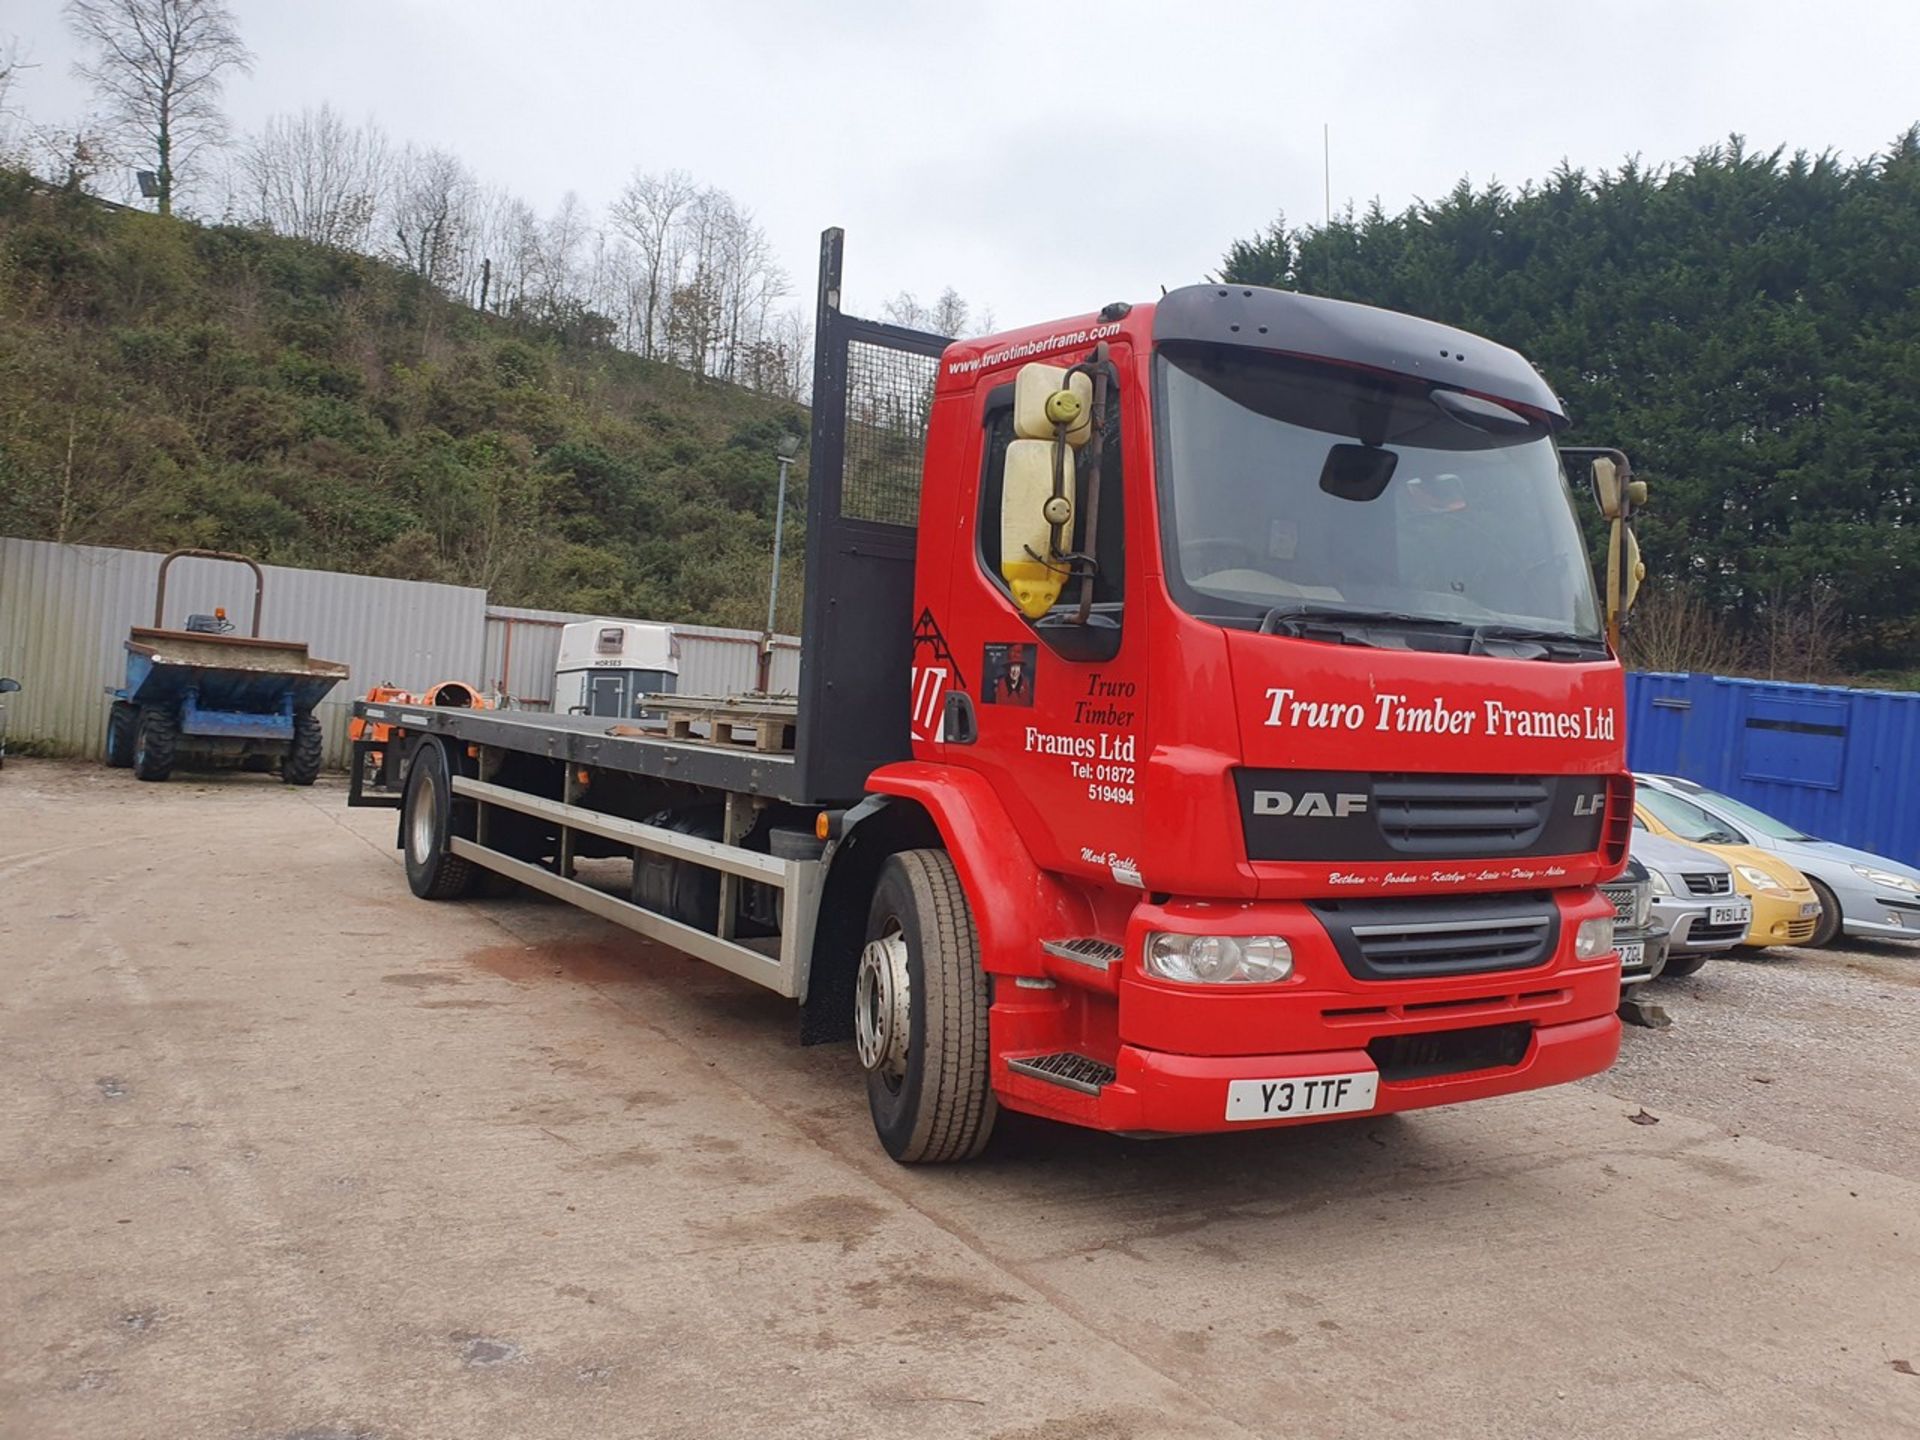 13/13 DAF TRUCKS FLAT BED - 6693cc 2dr (Red) - Image 14 of 23